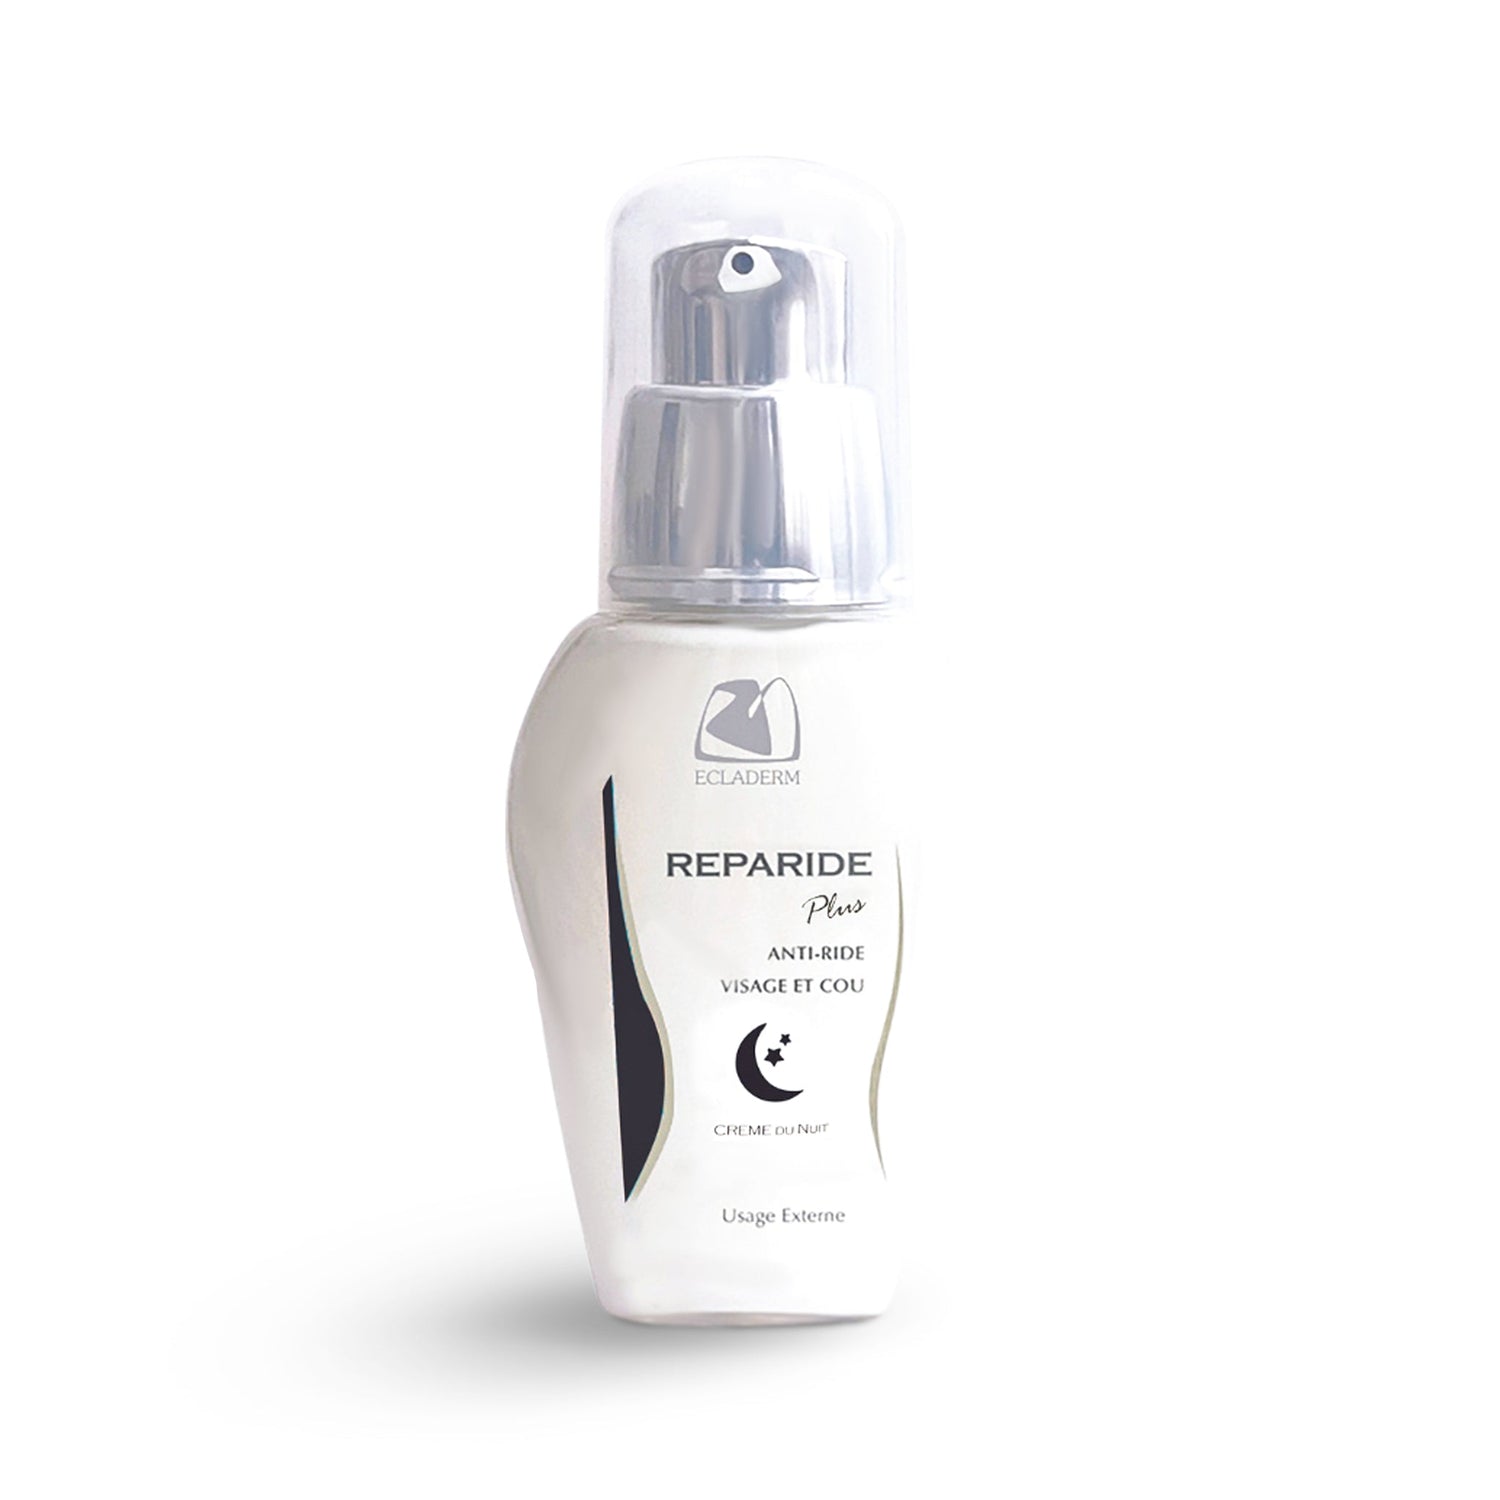 Ecladerm Reparide Anti-Aging Night Cream that reduces fine lines and wrinkles